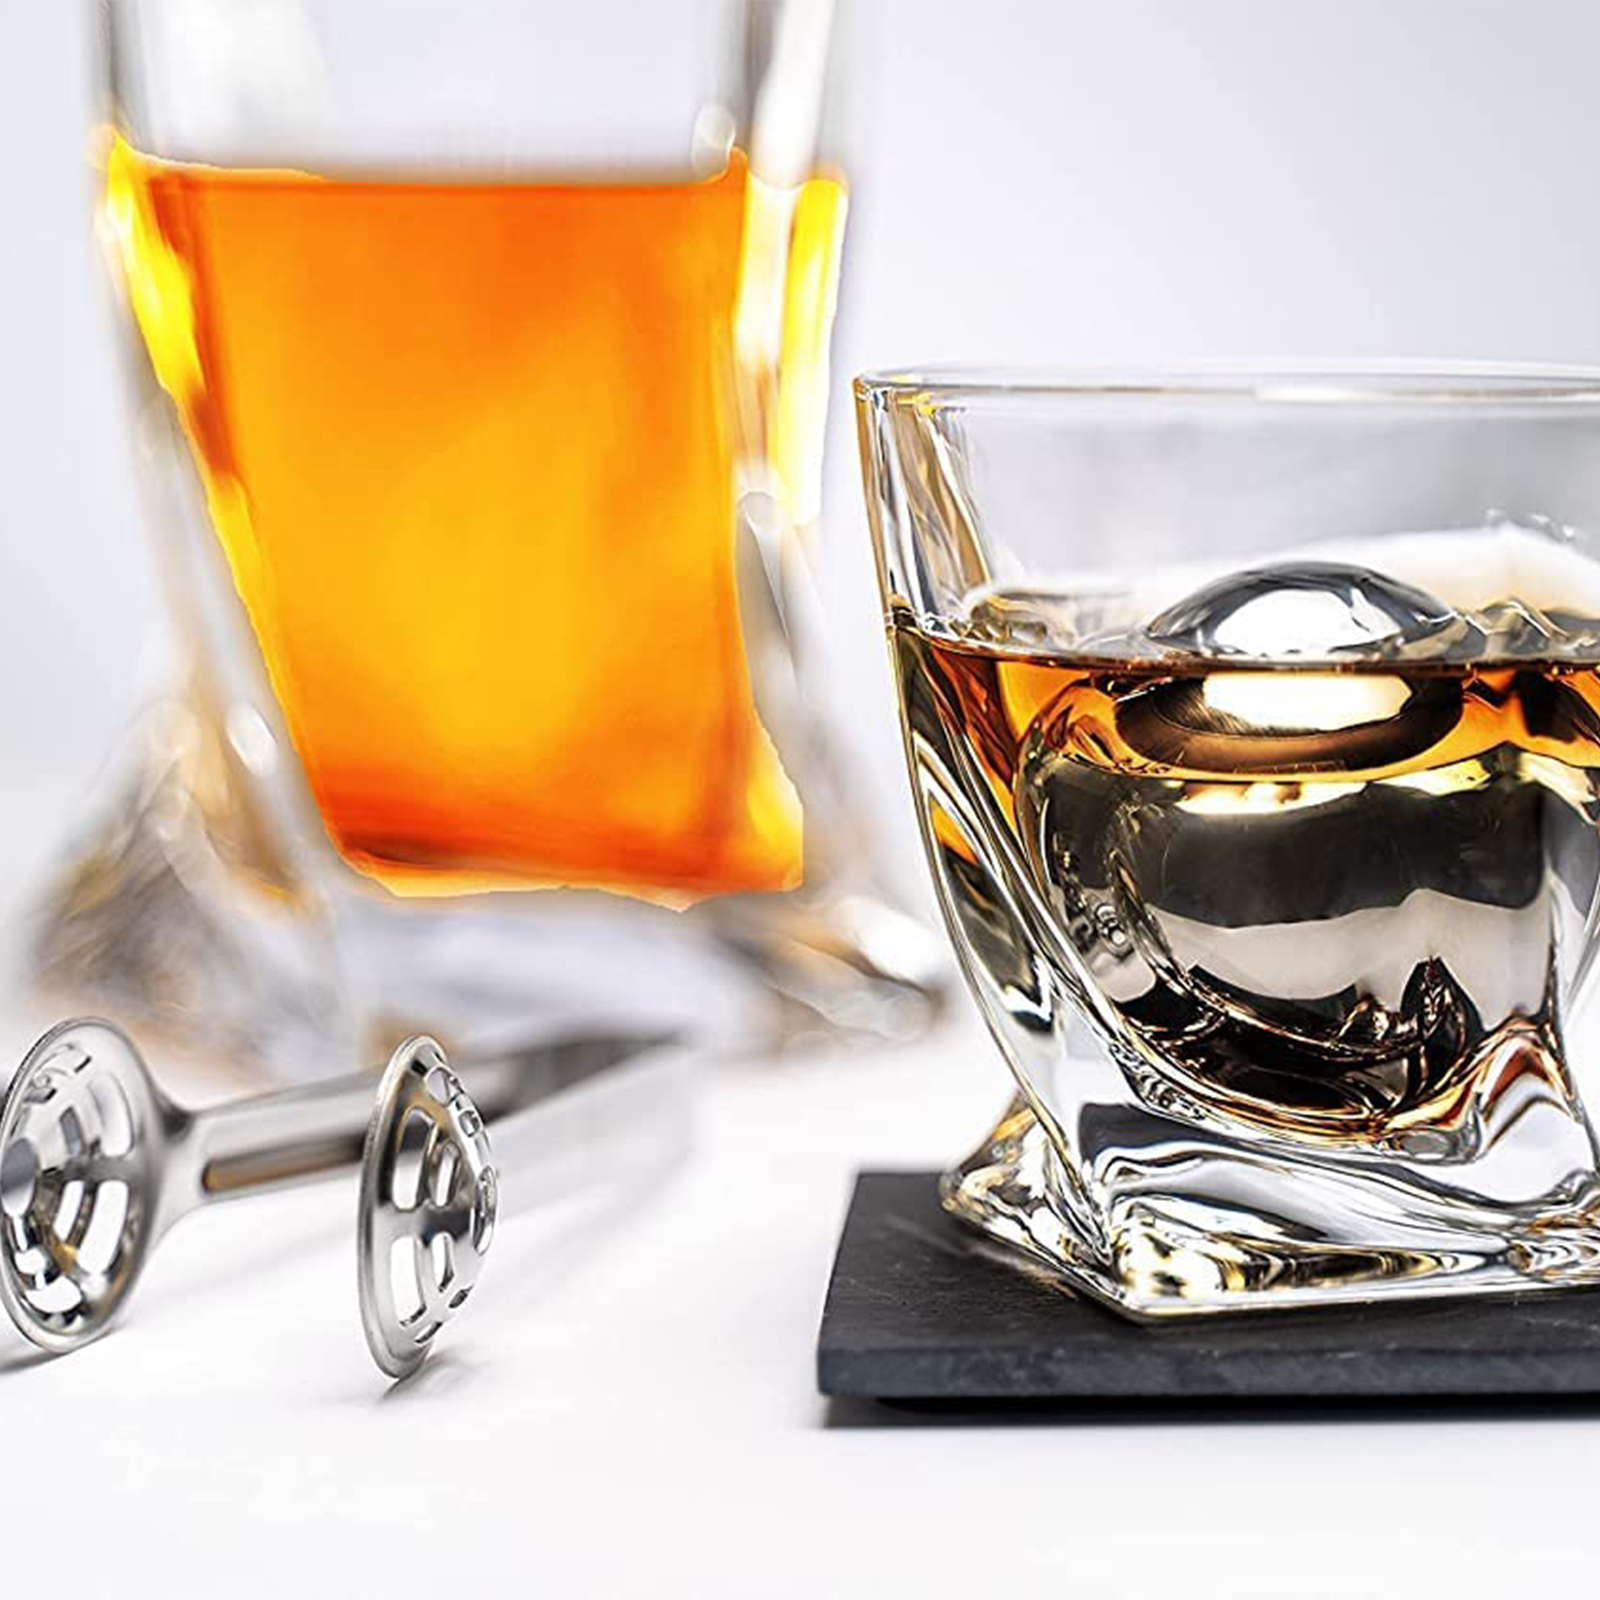 4 XL Stainless Steel Whisky Ice Balls, Special Tongs & Freezer Pouch in  Luxury Gift Box for Whiskey Lovers! 